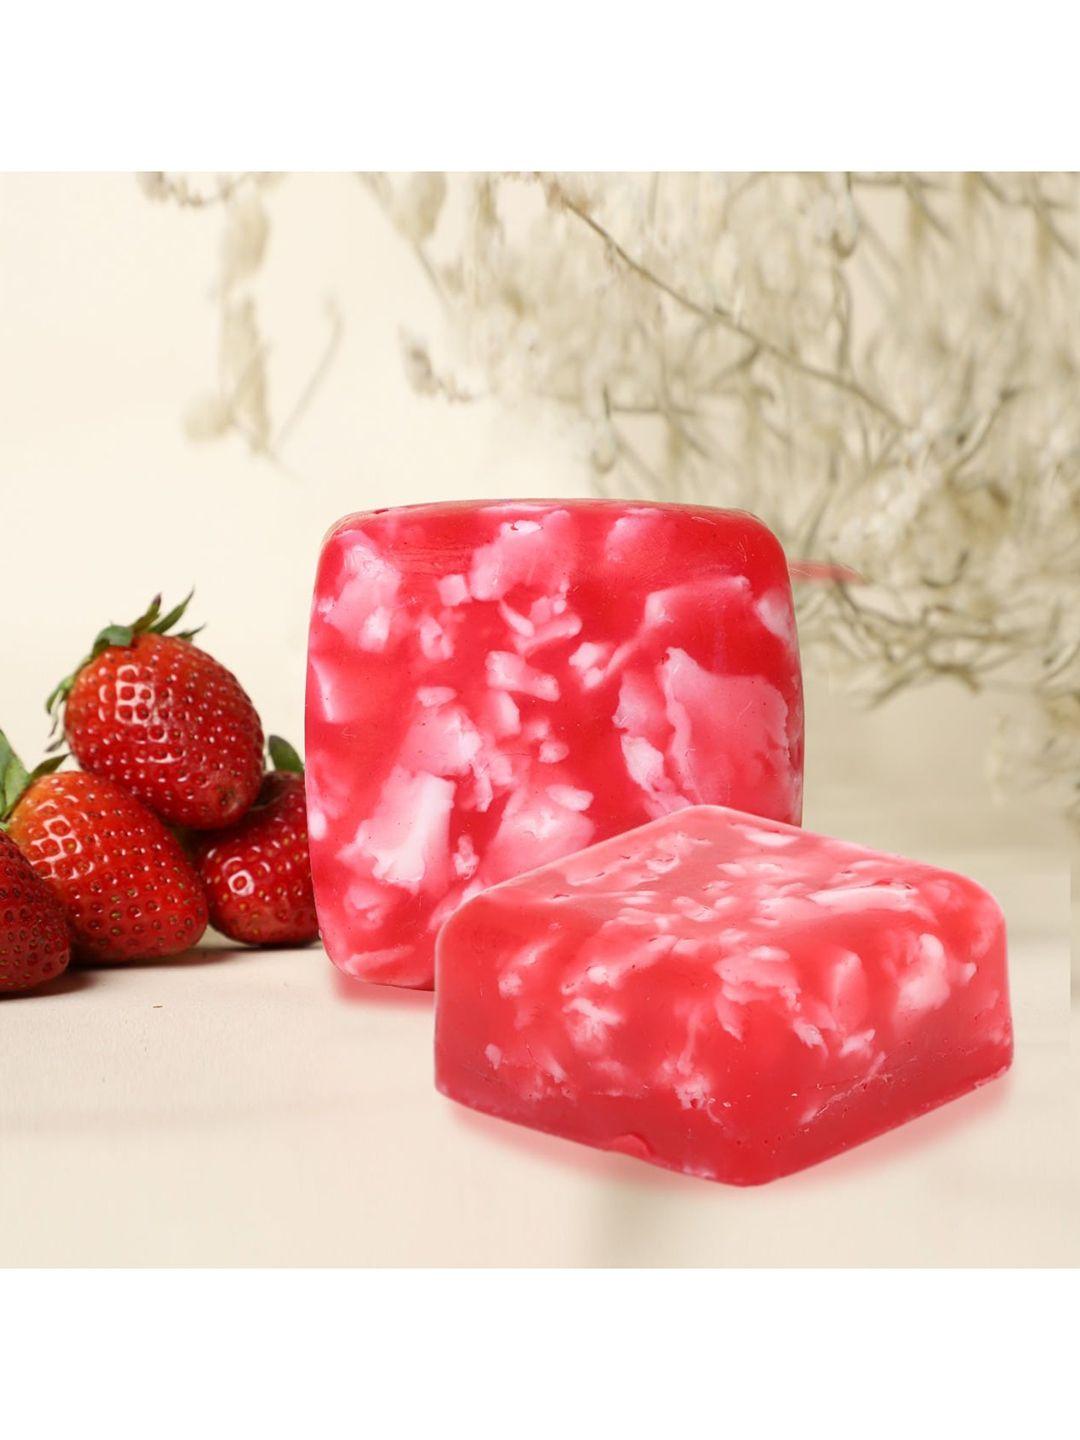 stay soapy set of 2 premium strawberry bathing soap with pure essential oil - 120 g each